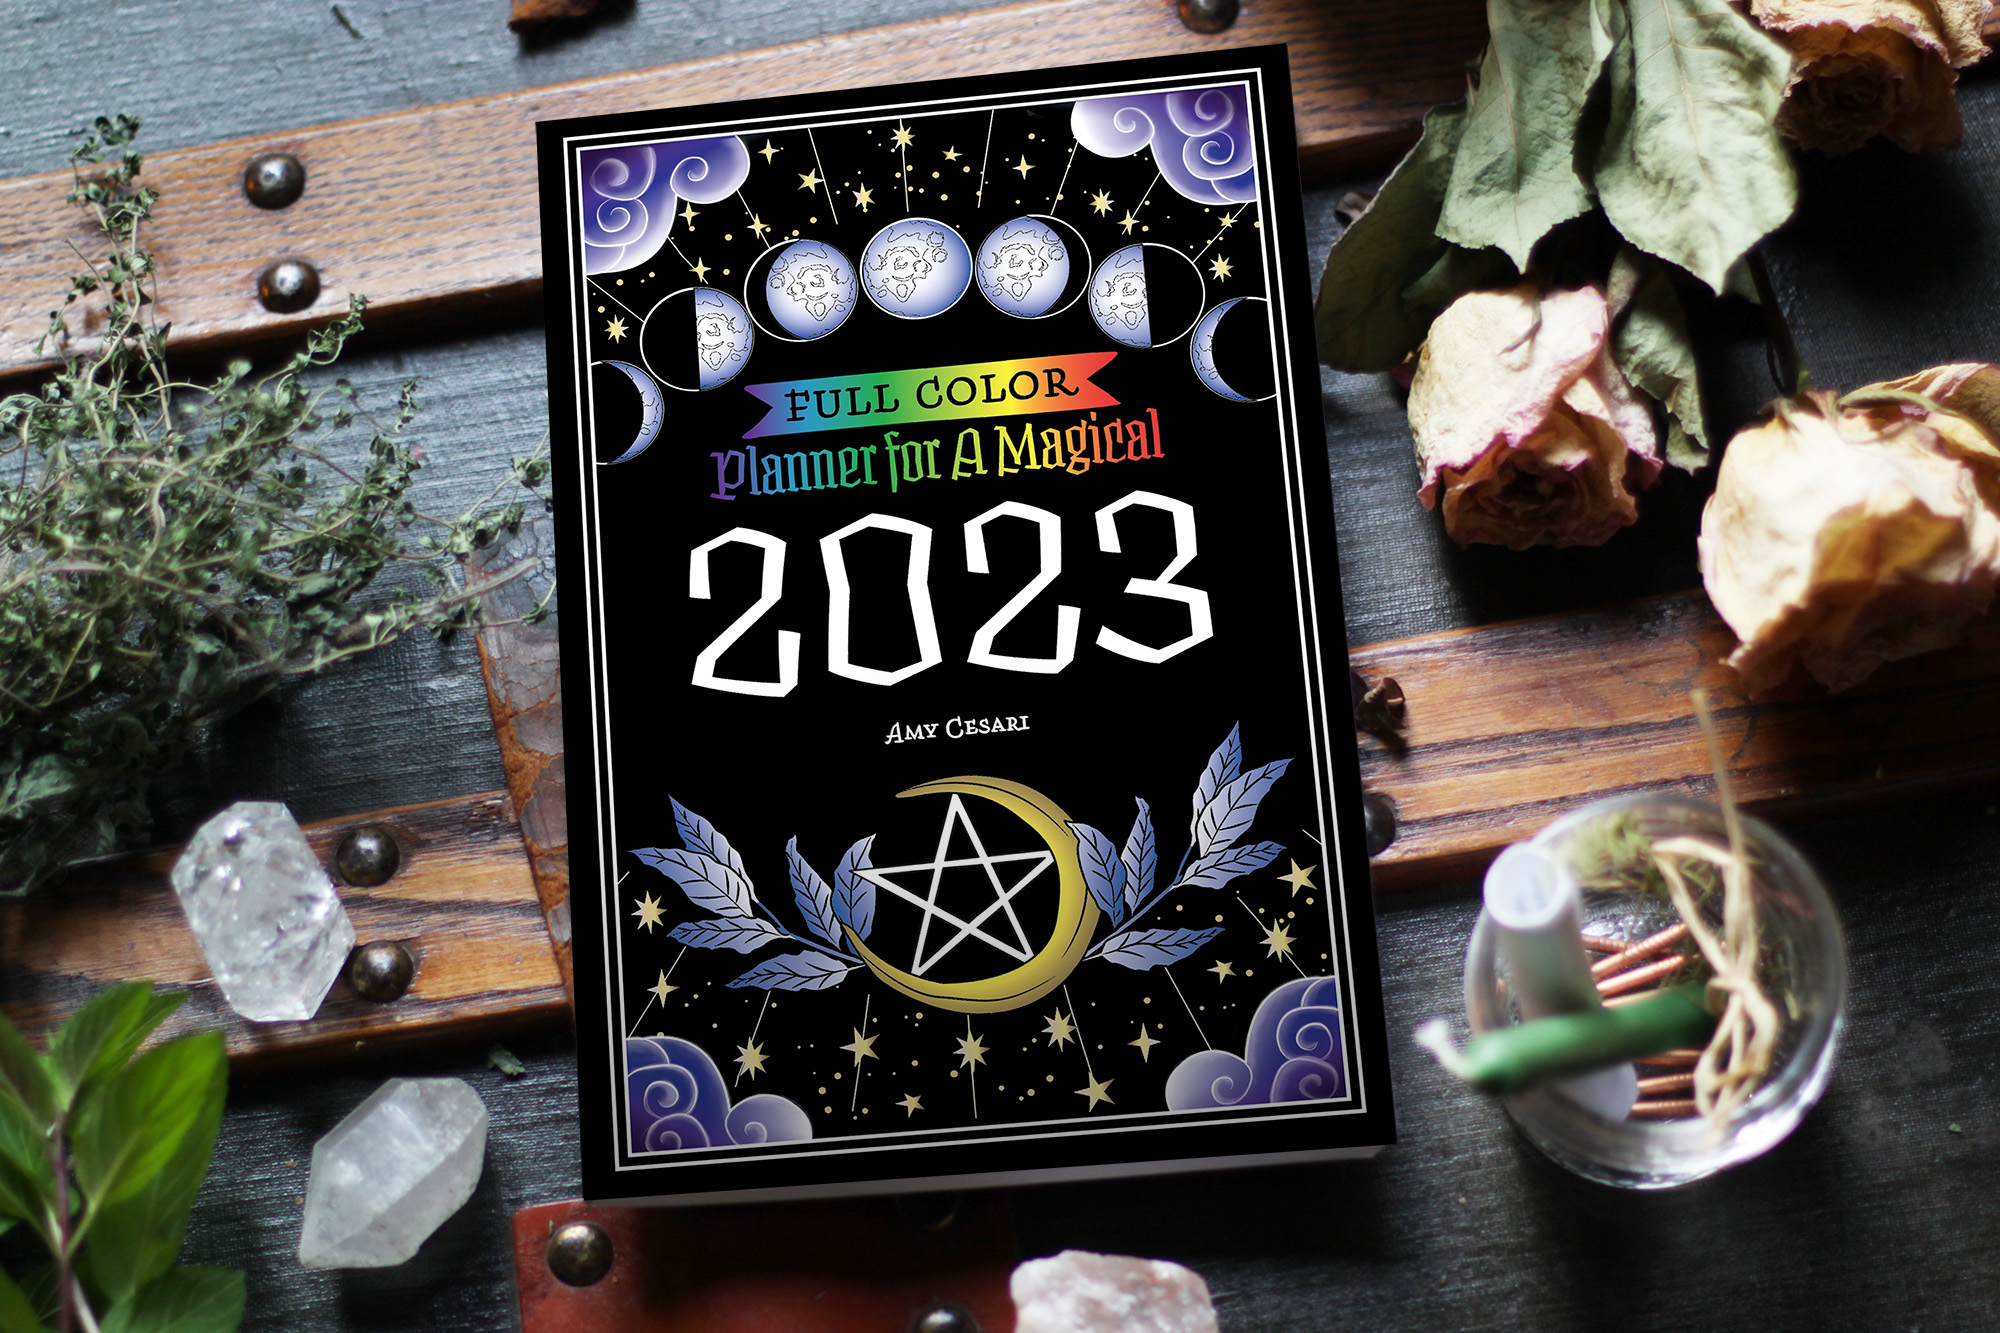 FULL COLOR Planner for a Magical 2023 Coloring Book of Shadows